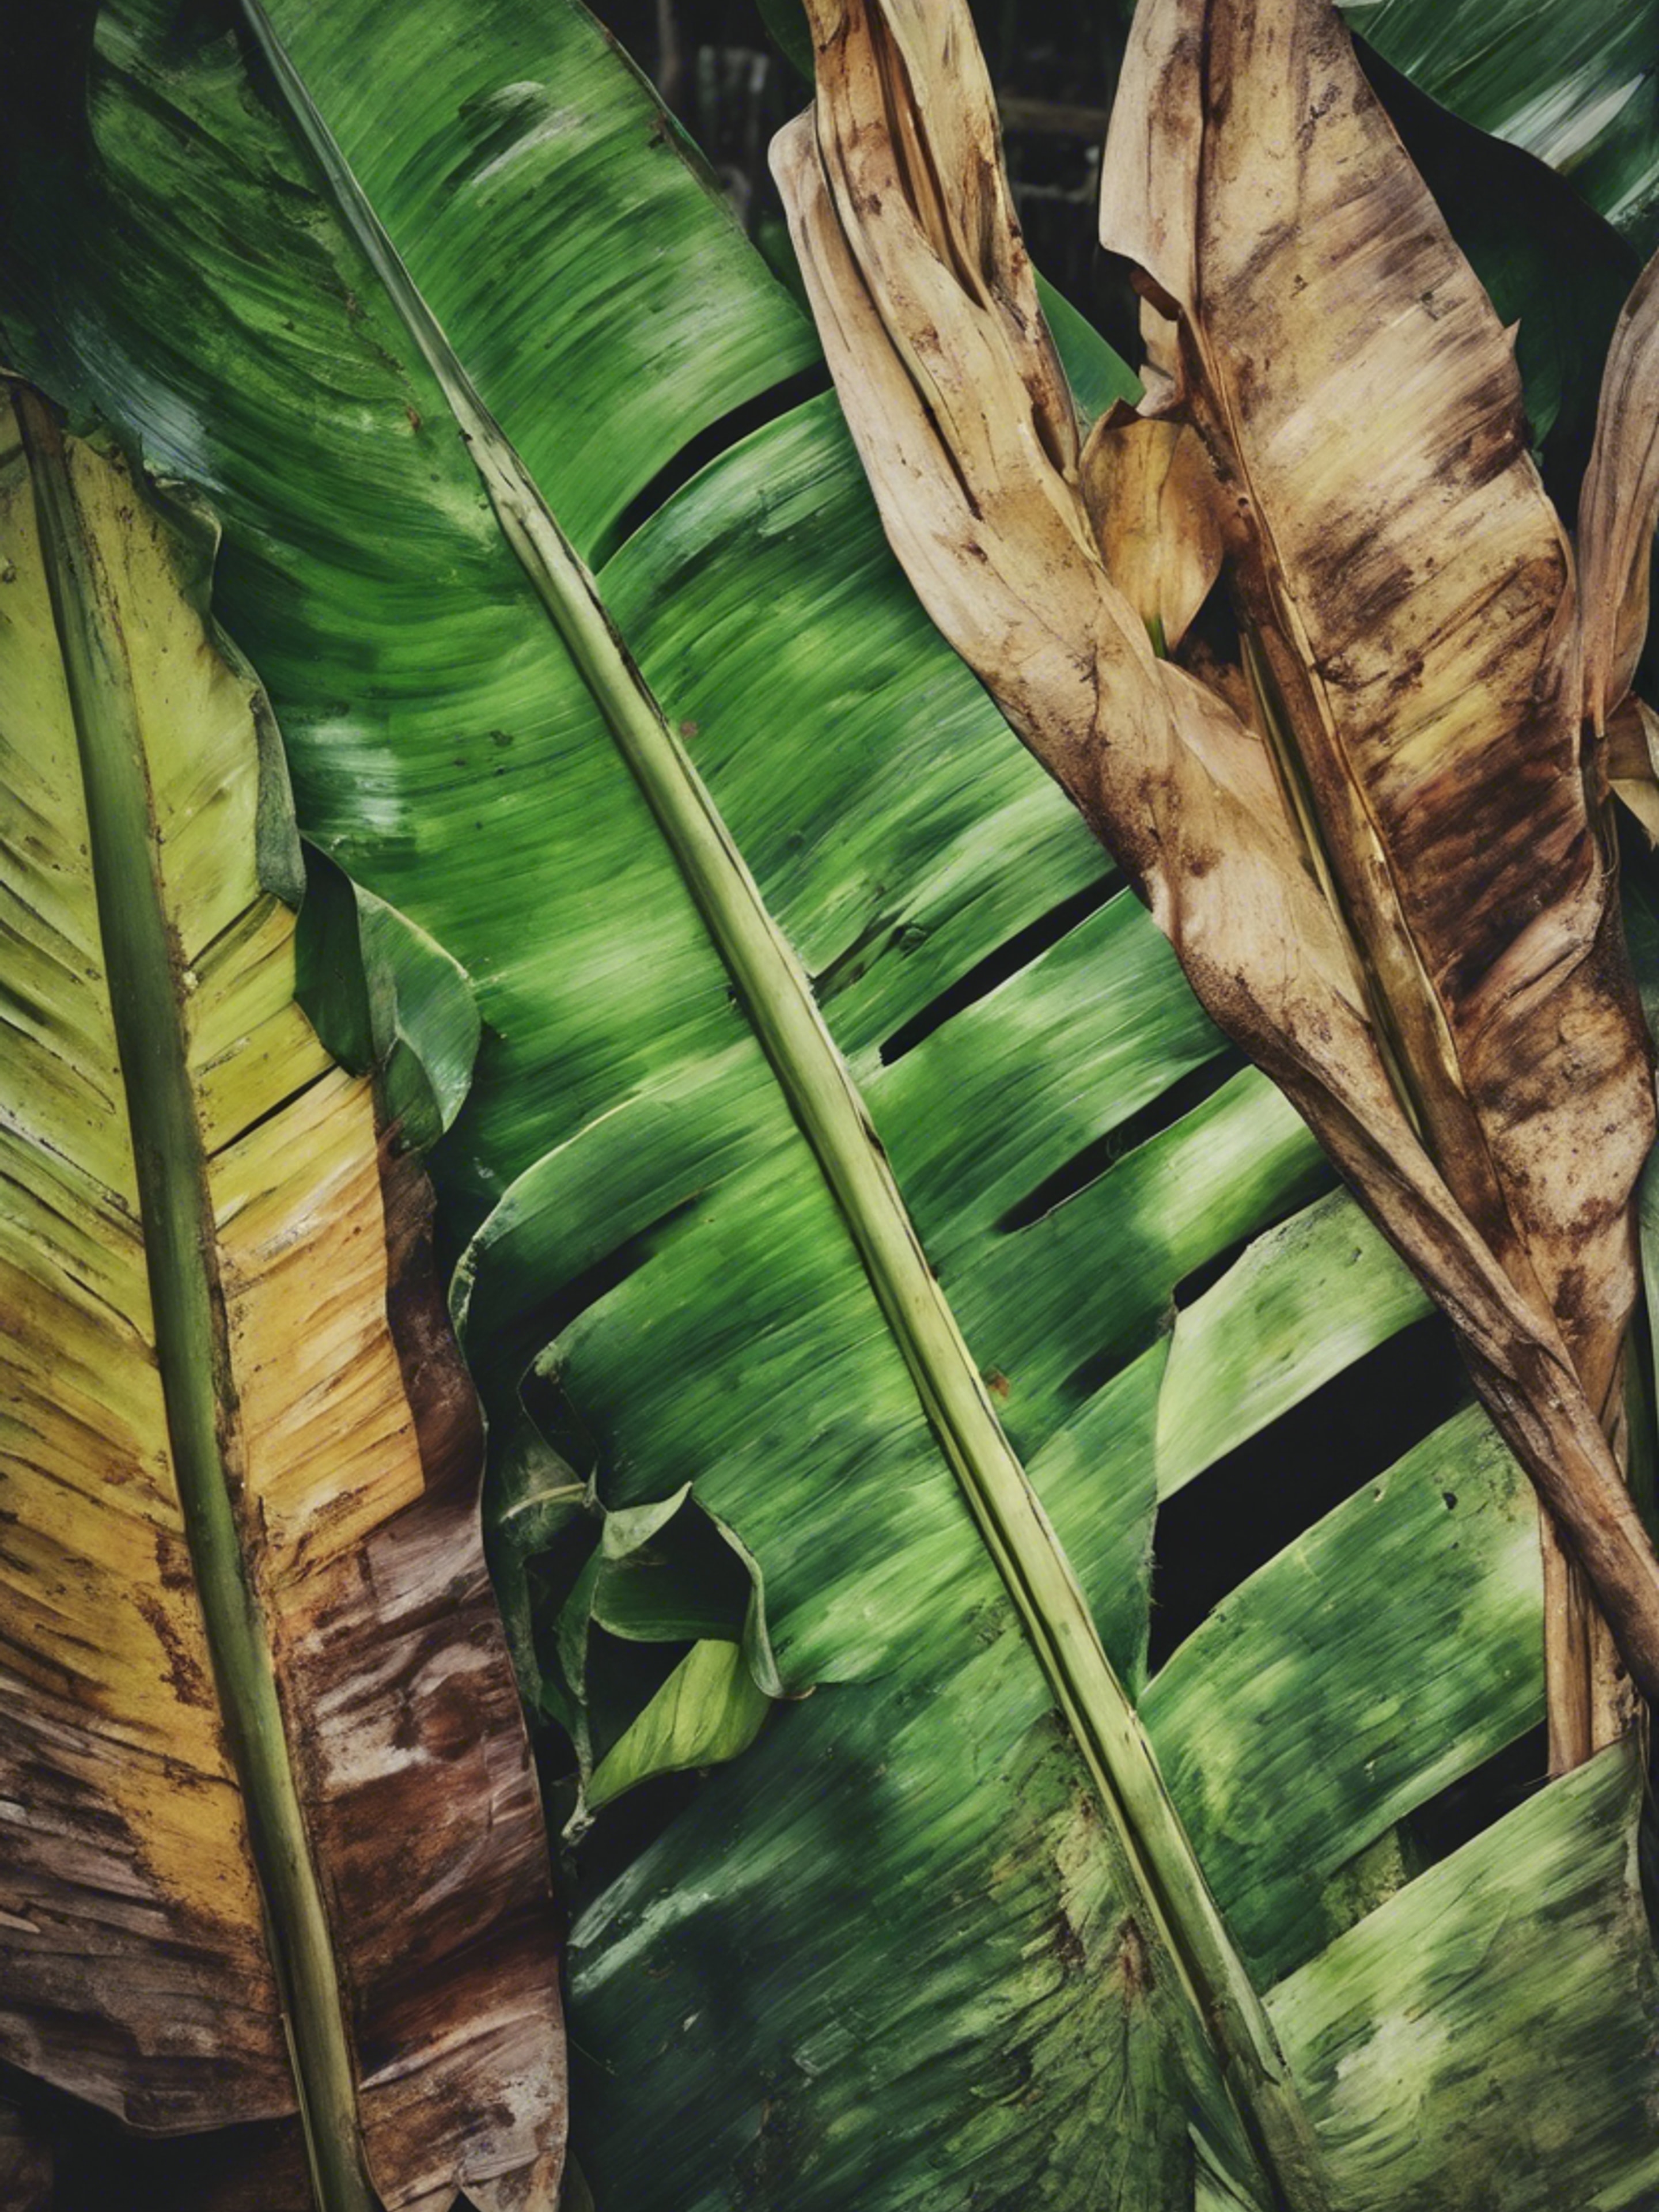 A textured painting of banana leaves in varying stages of life and decay. Валлпапер[272dba85425e4d608ad5]